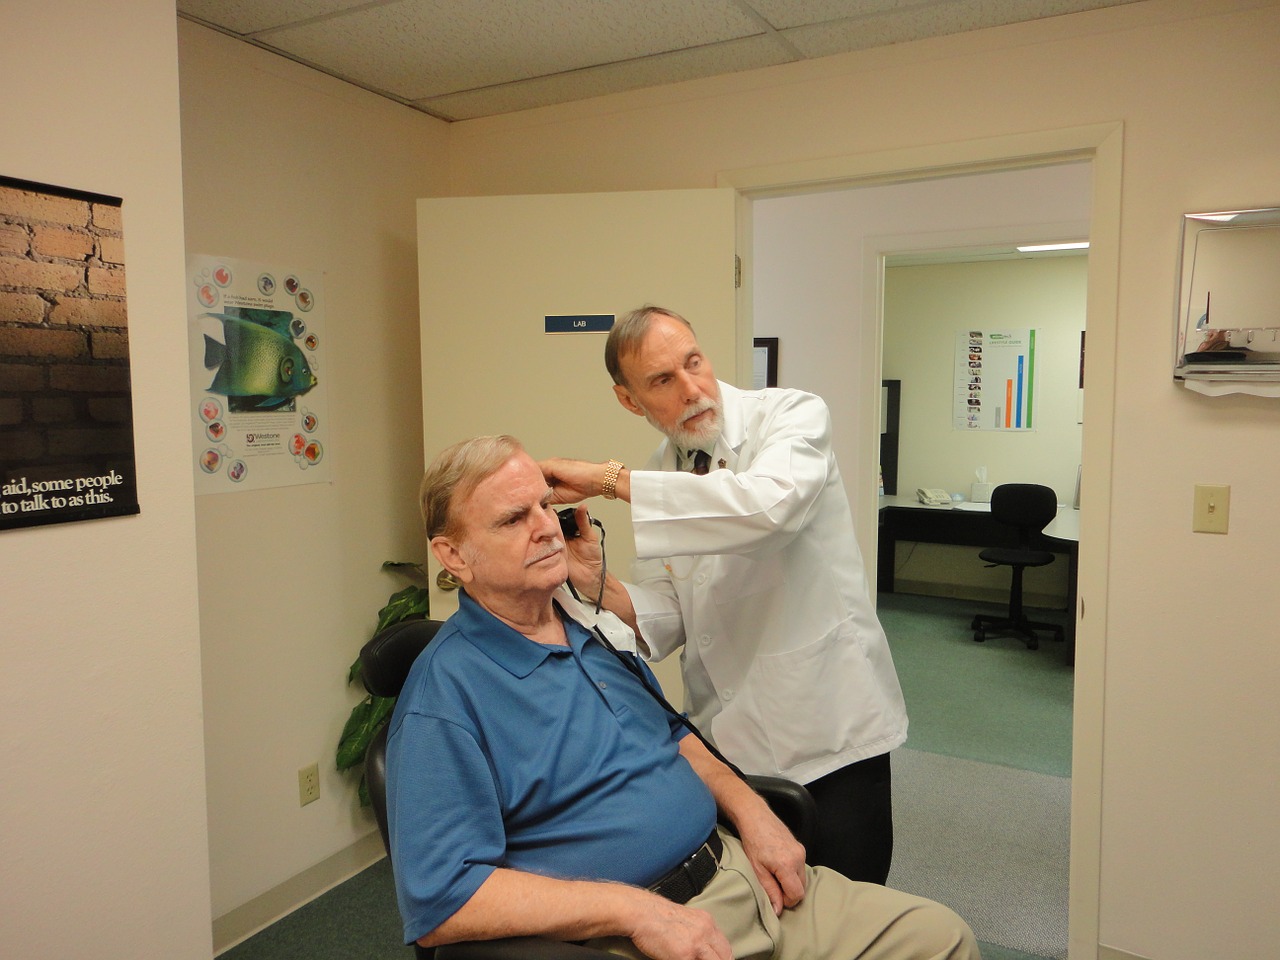 A man getting tested for hearing